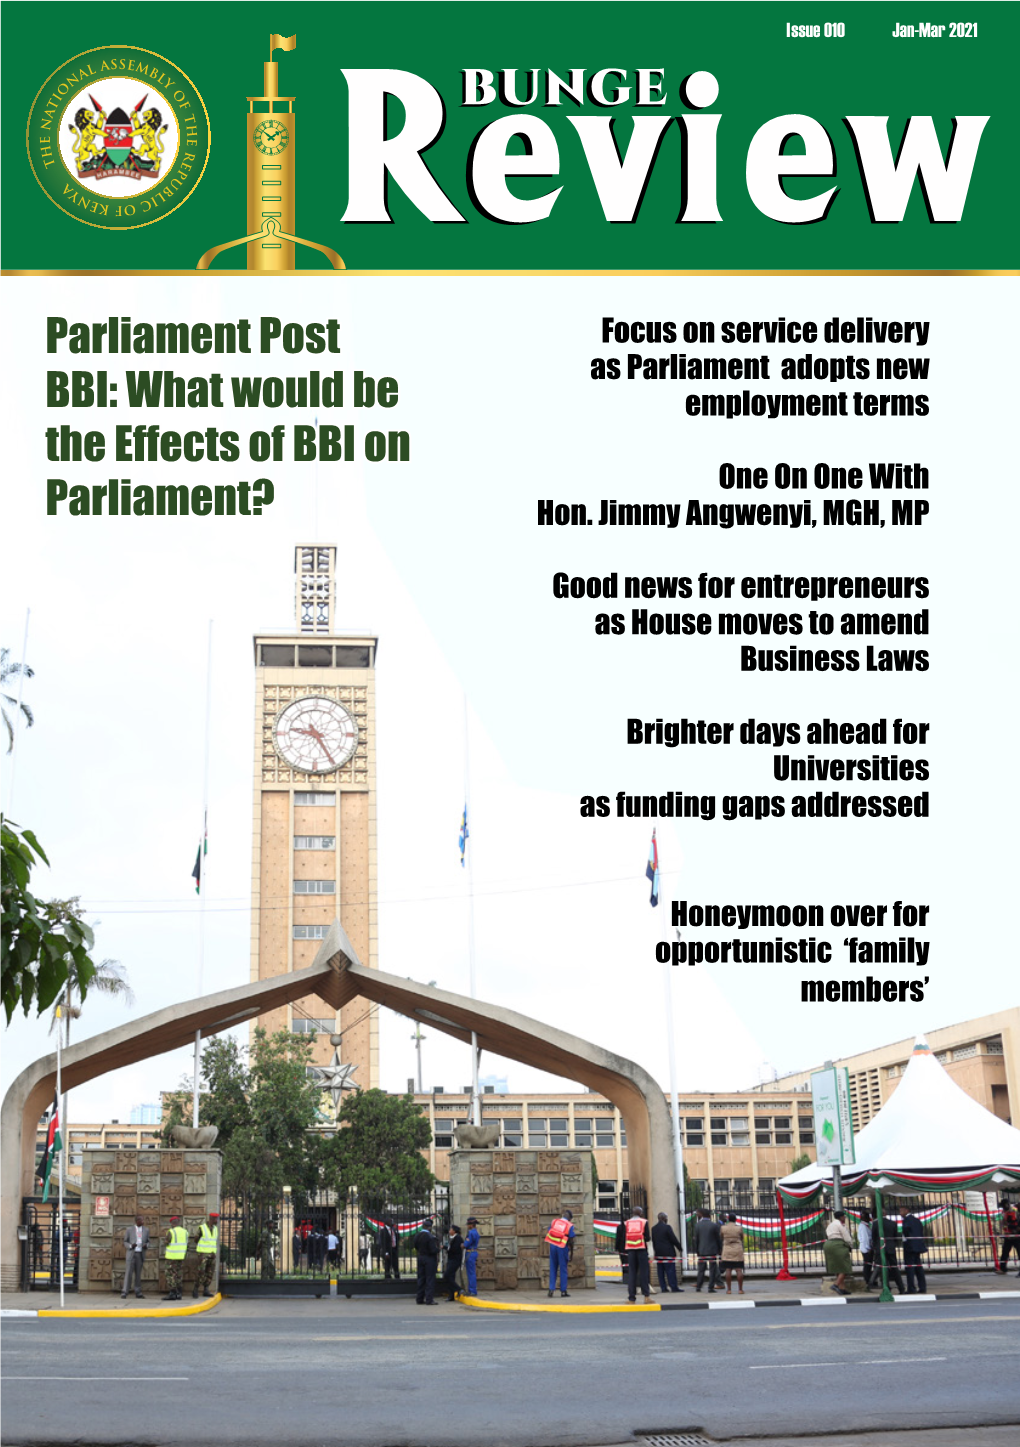 Parliament Post Focus on Service Delivery As Parliament Adopts New BBI: What Would Be Employment Terms the Effects of BBI on One on One with Parliament? Hon